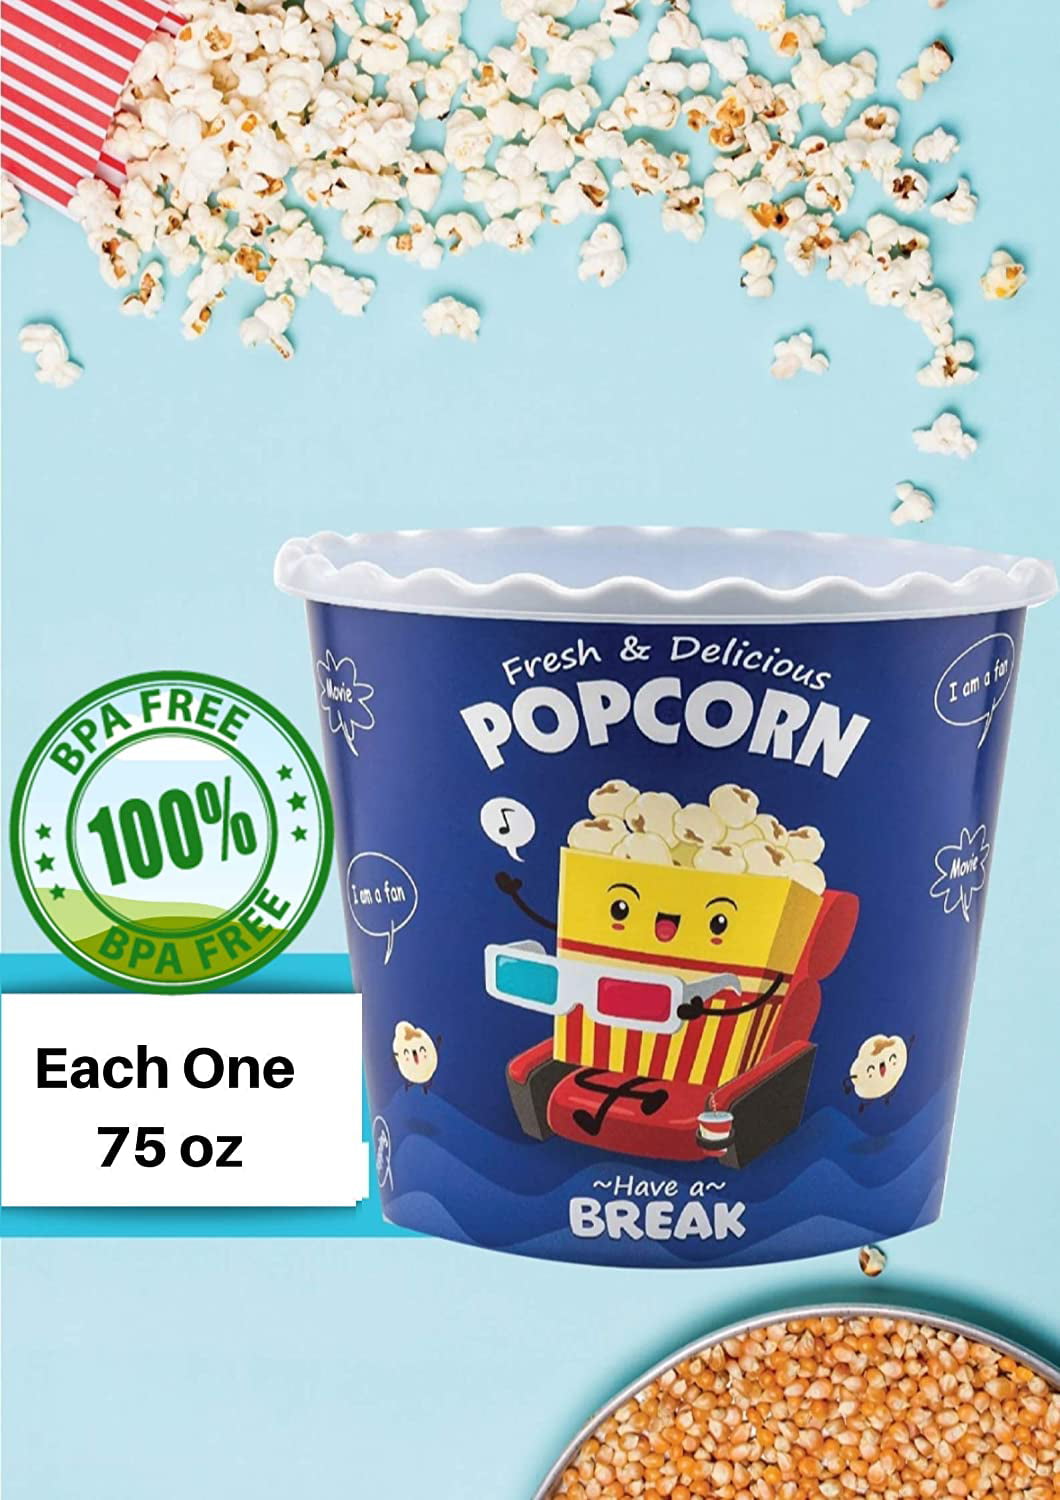 OnOn Express-Modern Style Reusable Plastic Popcorn Containers/Popcorn Bowls Set for Movie Theater Night BPA Free-4 Pack- Each One 75 oz Blue TS Washable in The Dishwasher - 